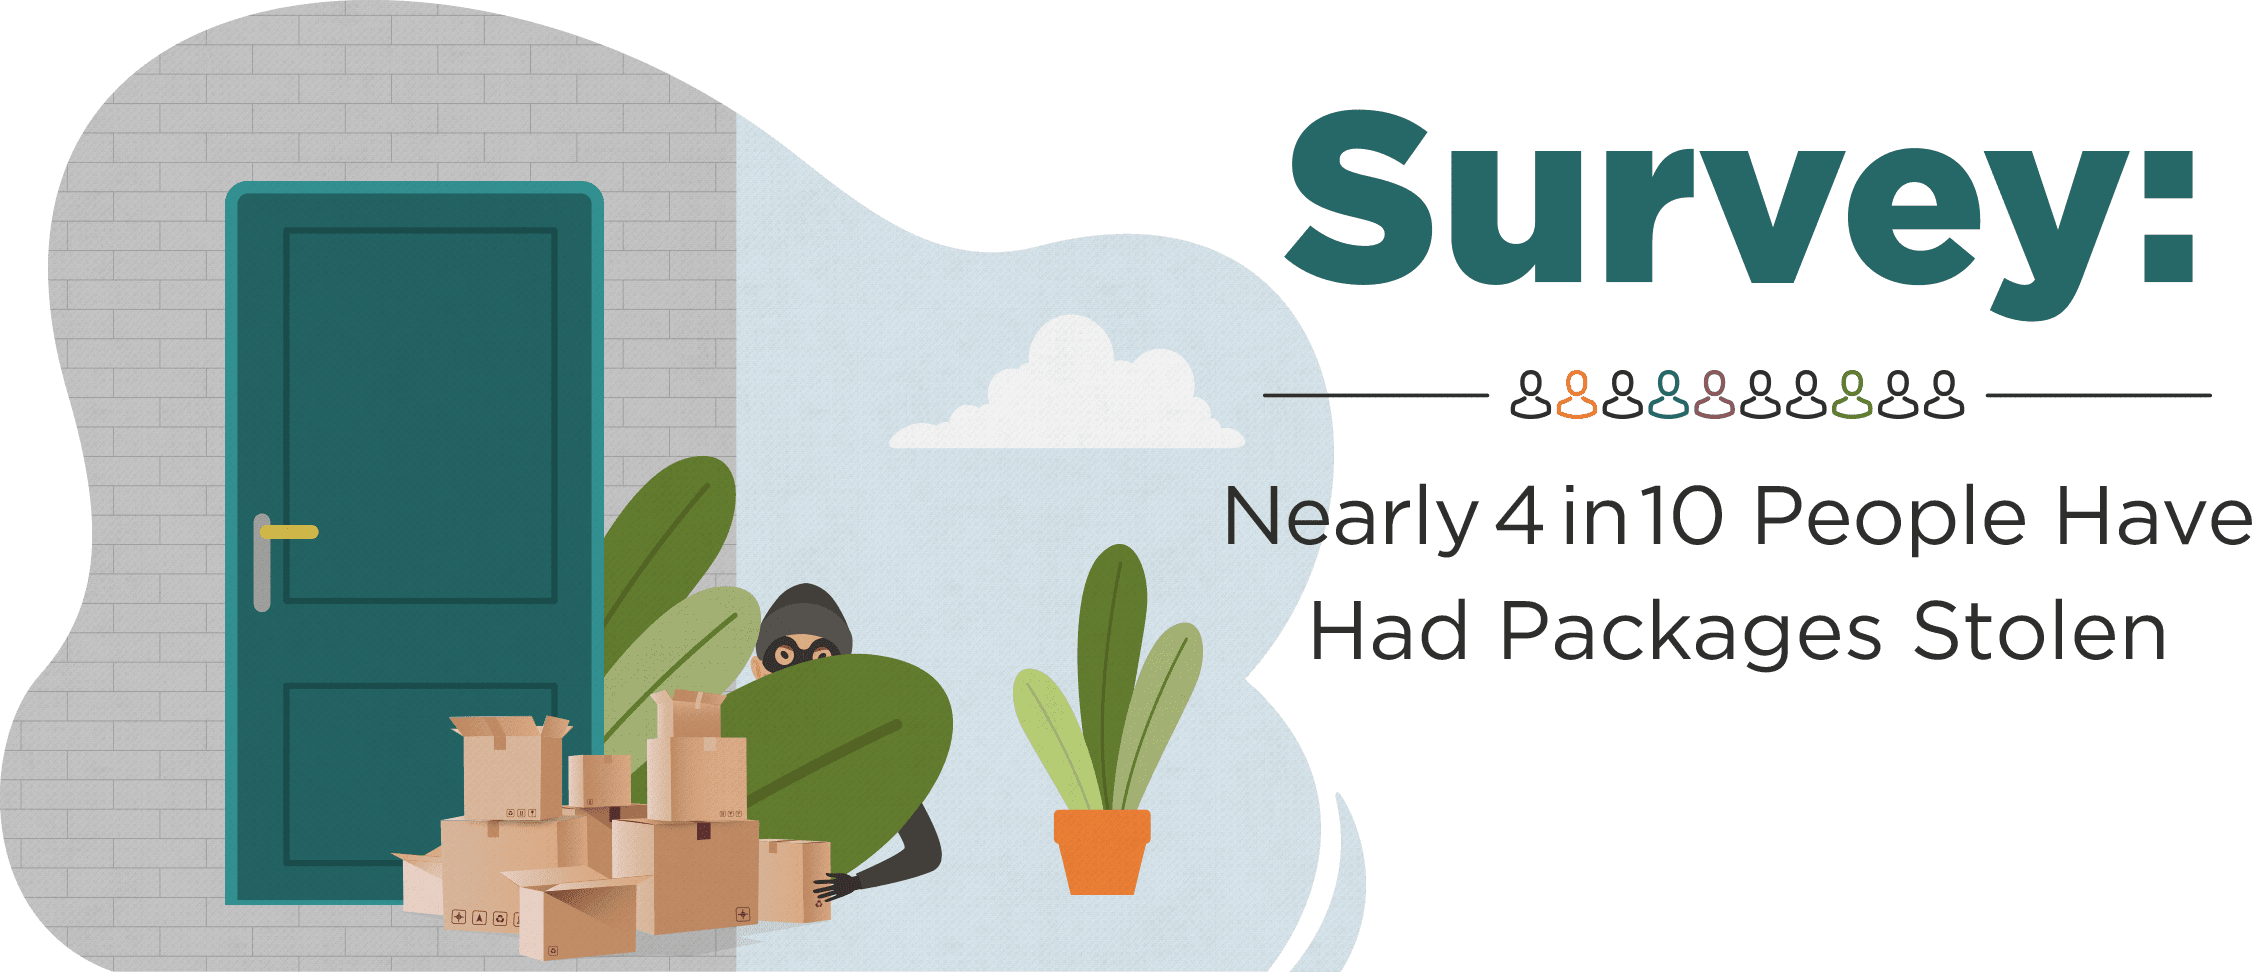 Security.org Survey: Nearly 4 in 10 People Have Had Packages Stolen